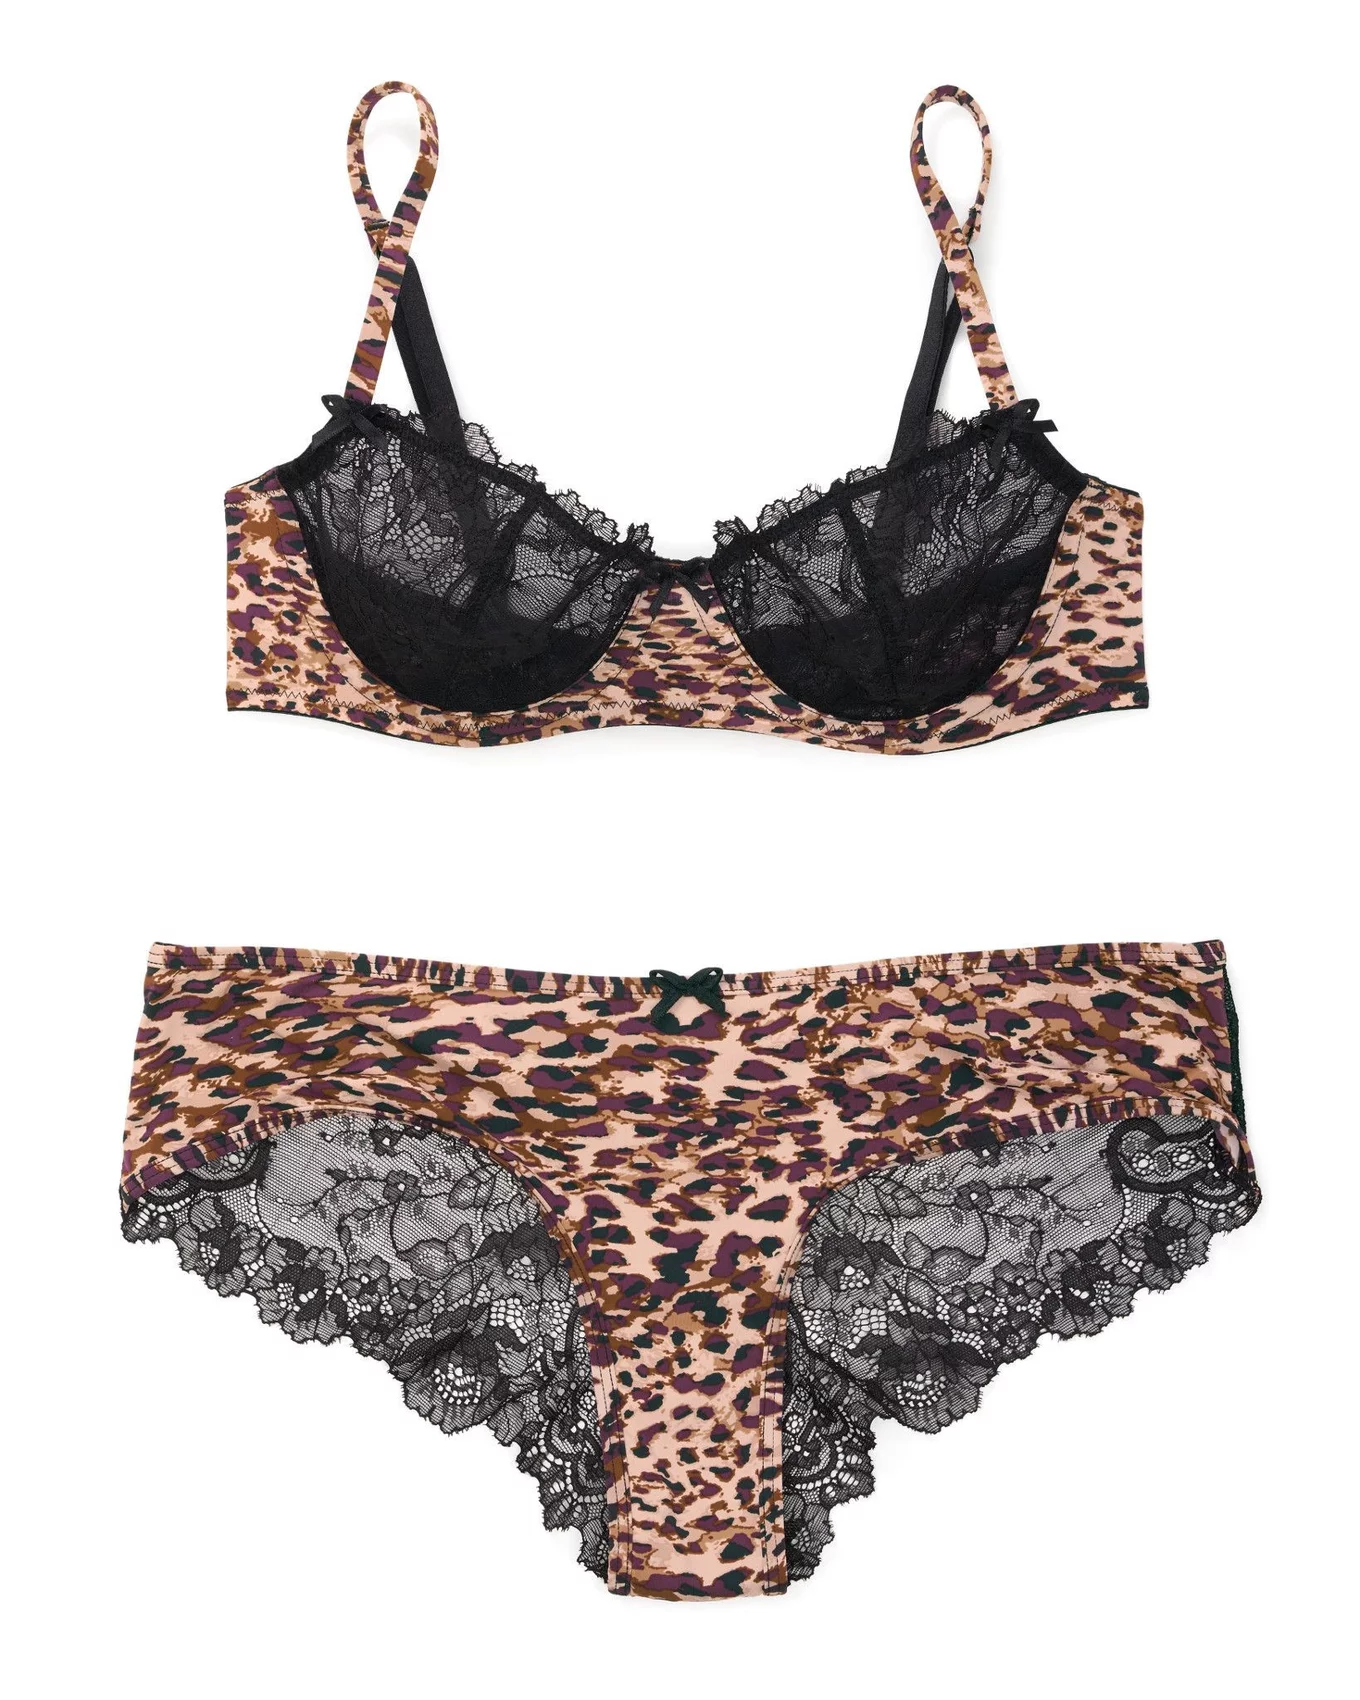 darrin klein recommends cheetah print bra and panties pic